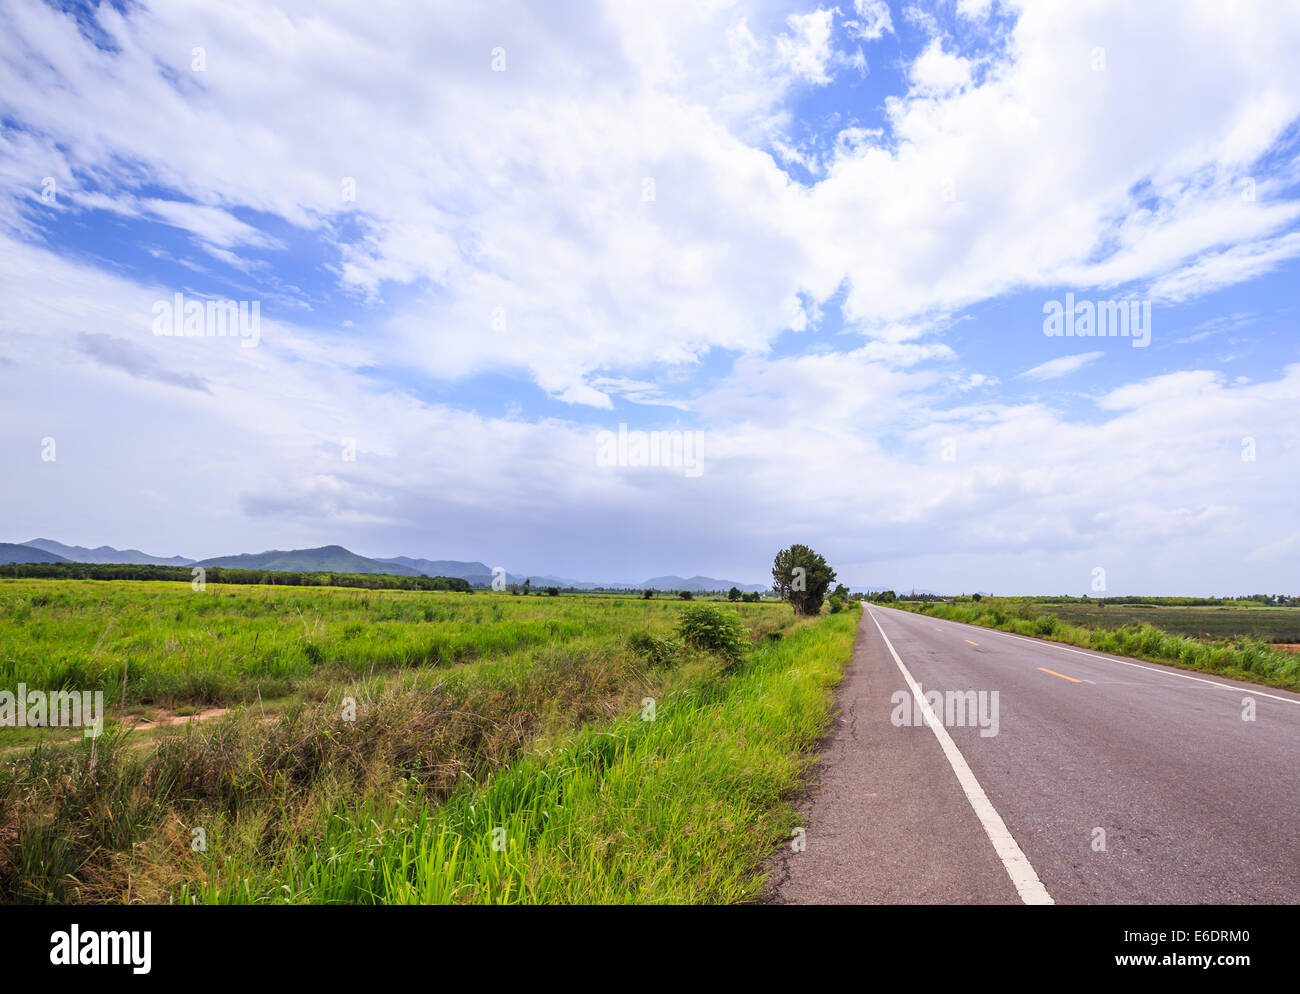 A long local road in a rural area with white cloud and blue sky. The road is surrouded by green fields. Stock Photo